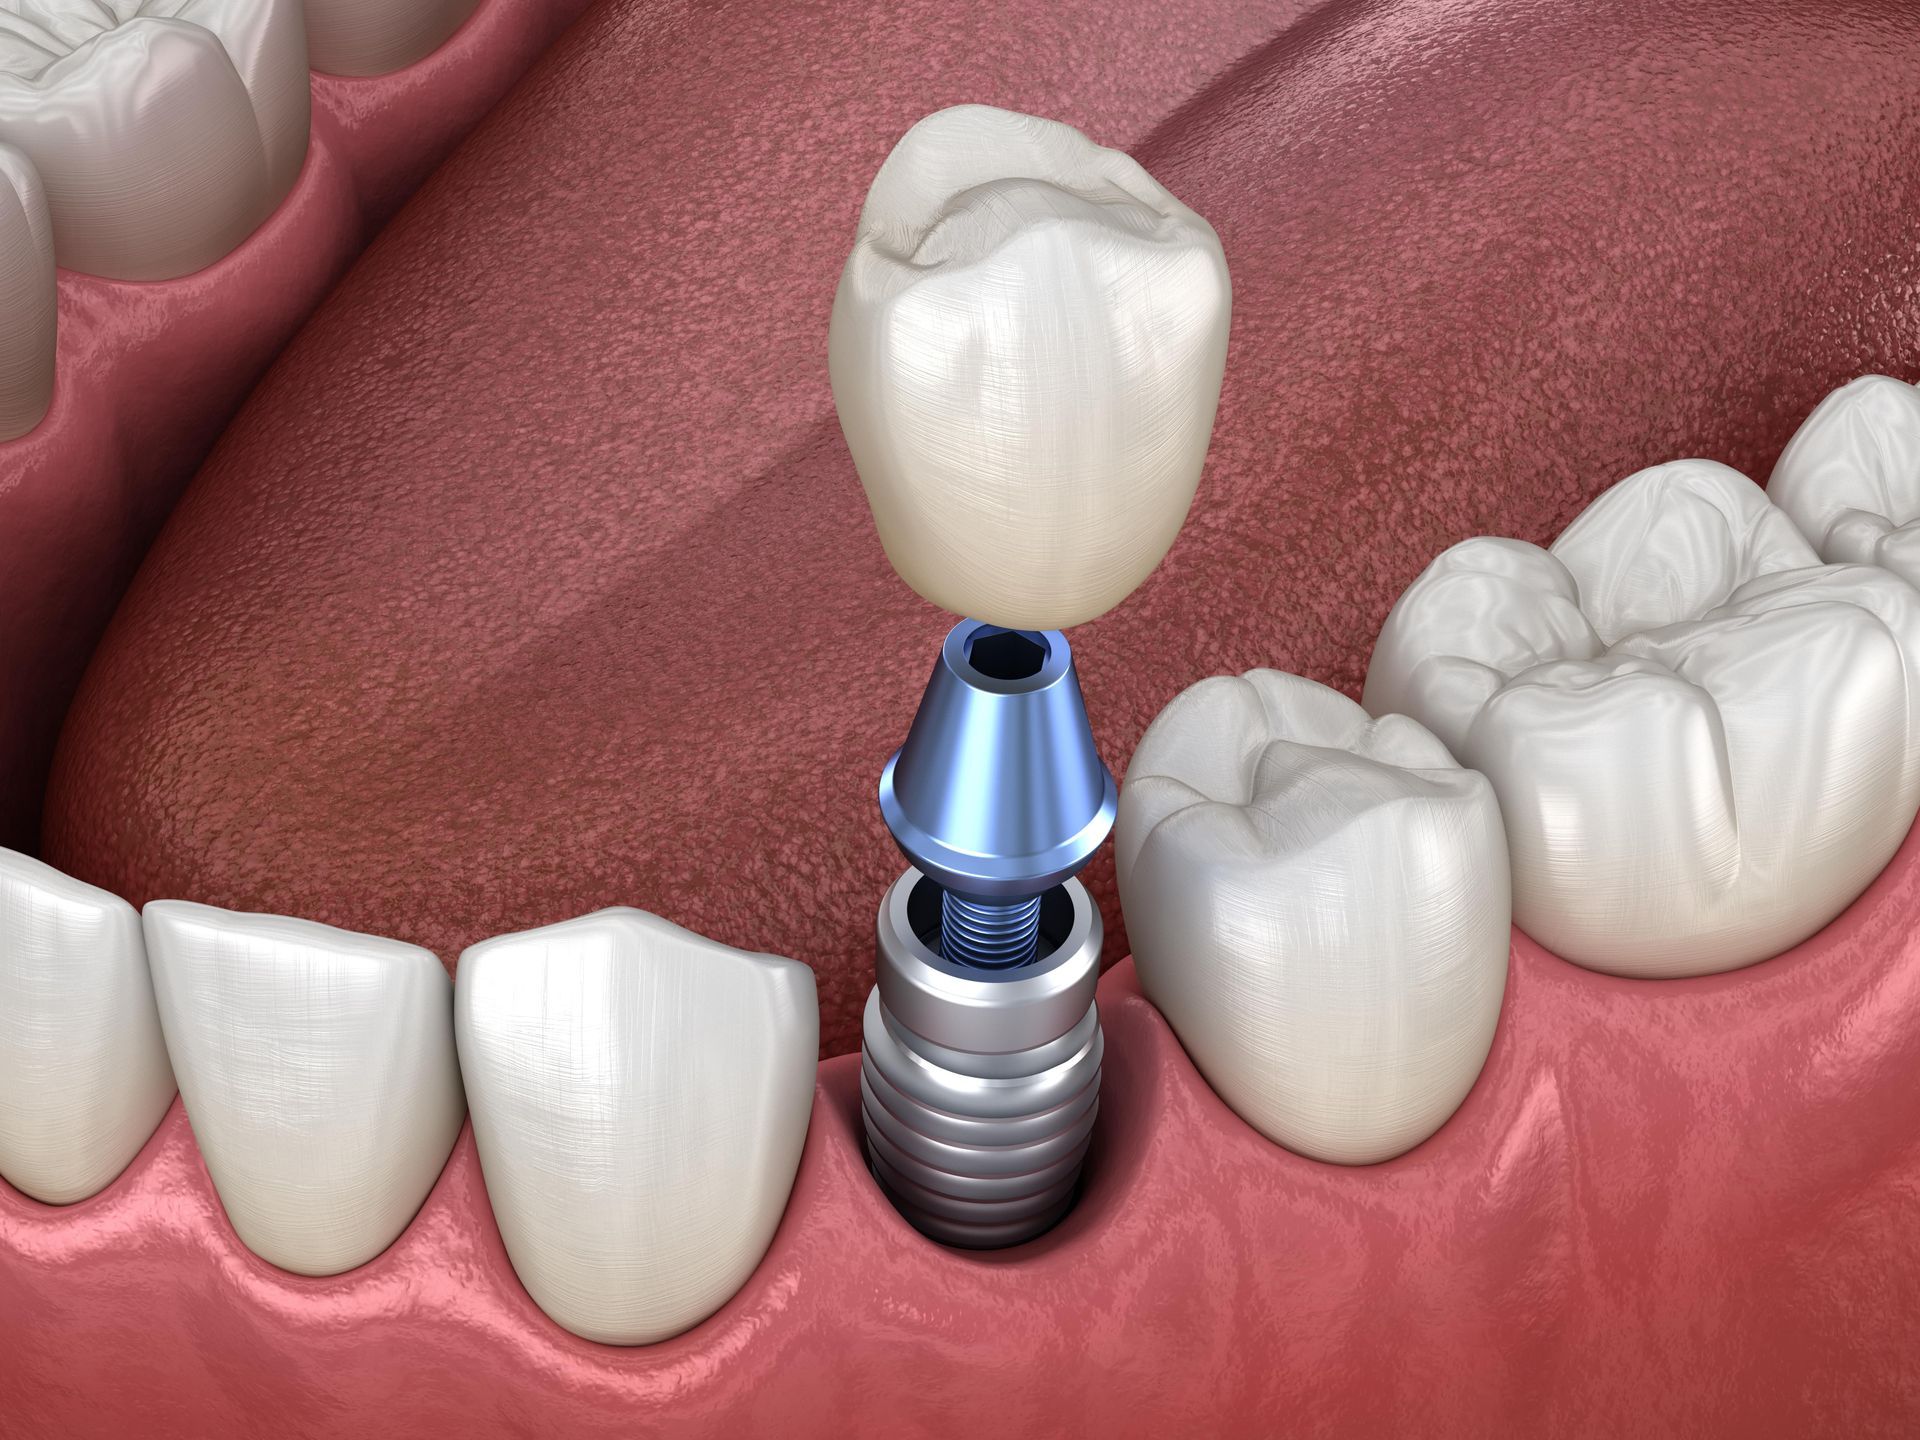 A computer generated image showing a single dental implant, abutment, and crown